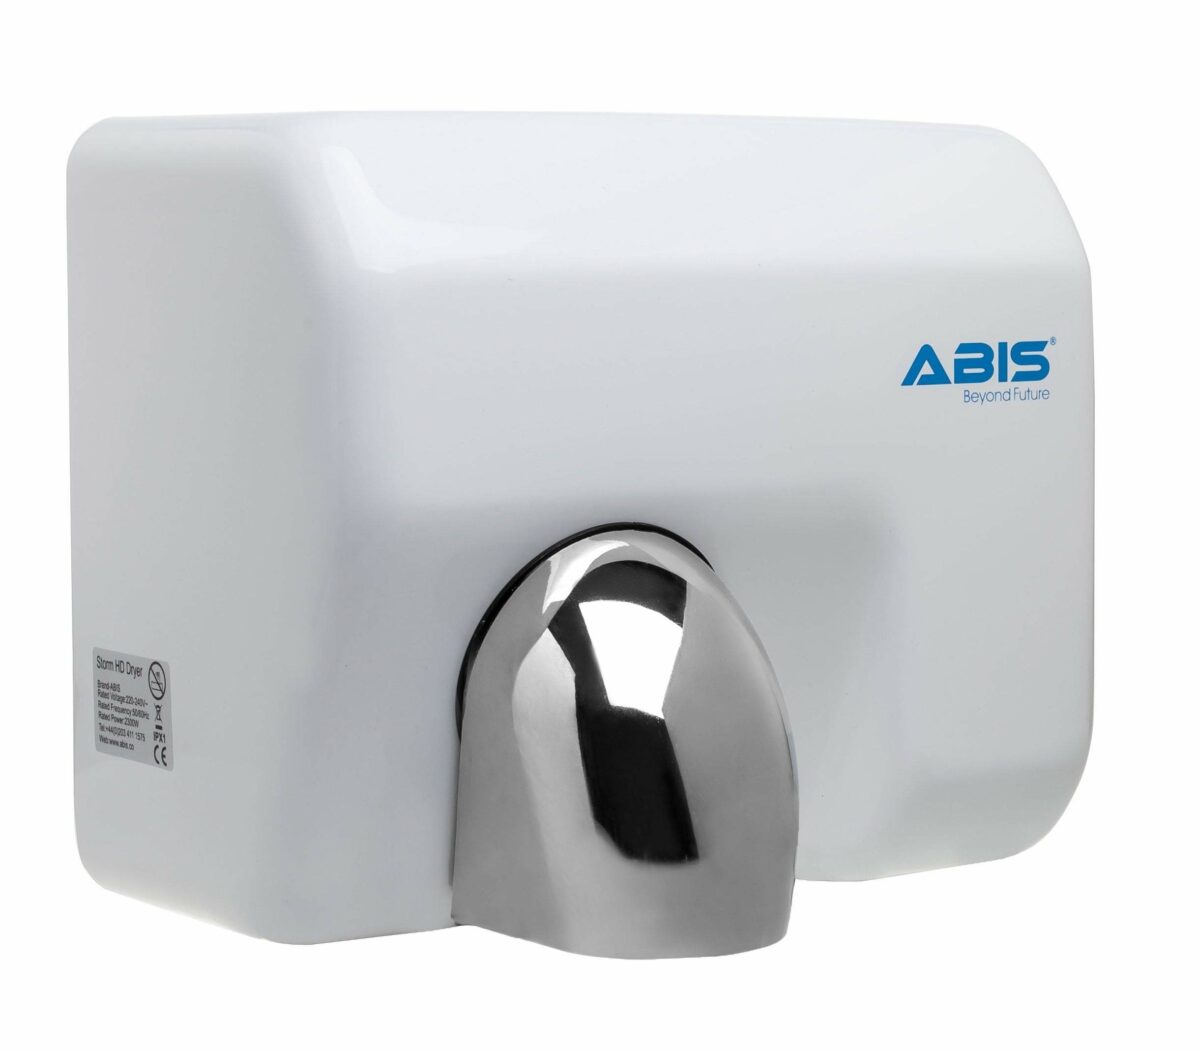 Storm Stainless Steel Commercial Hand Dryer - White - ABIS